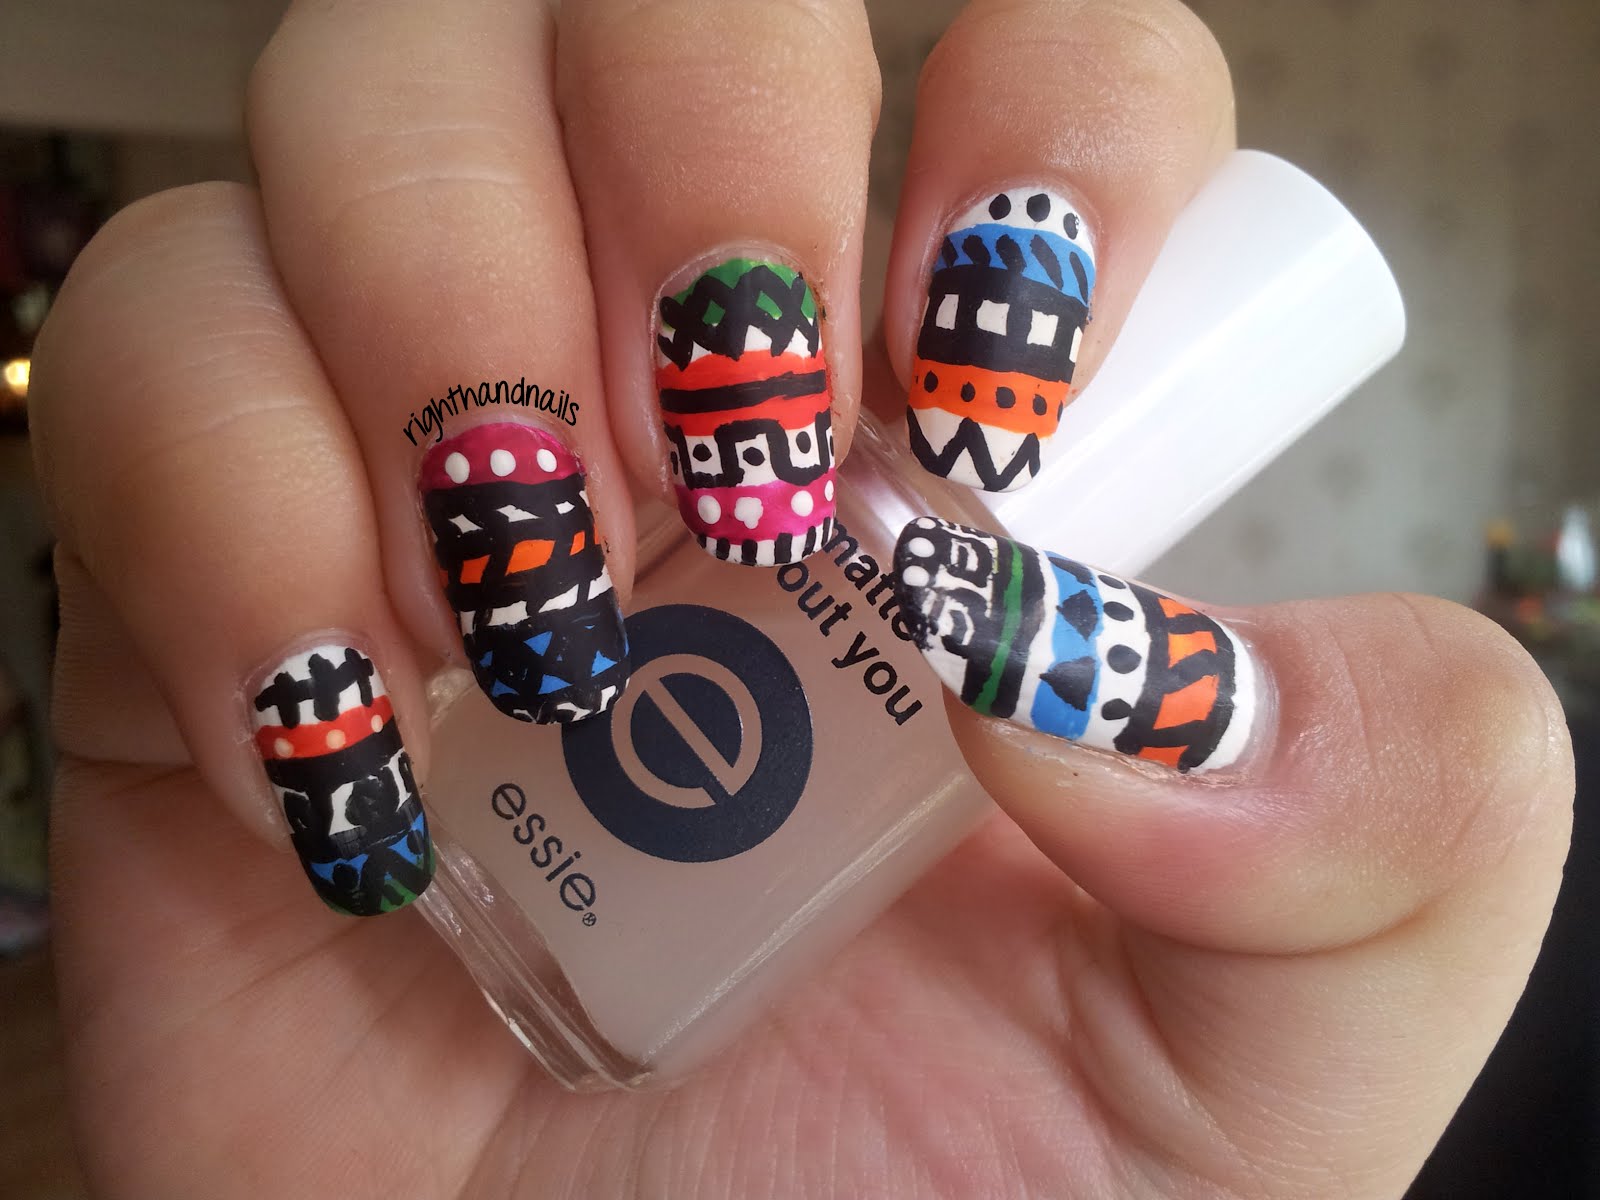 3. How to Create Tribal Nail Art in 5 Simple Steps - wide 2